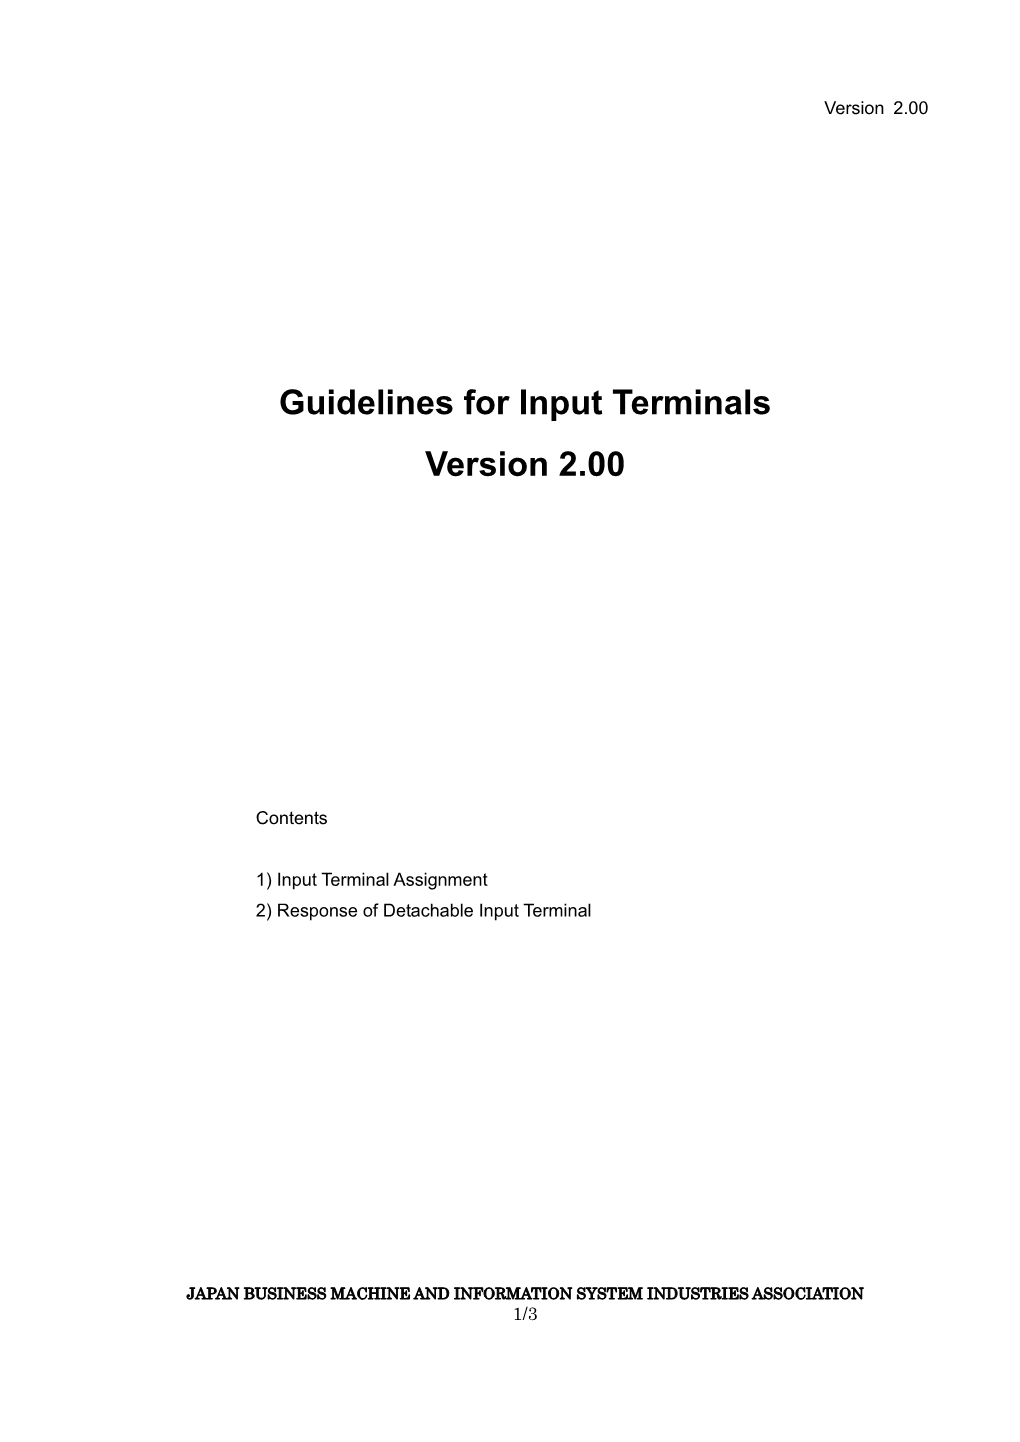 Guidelines for Input Terminals Version 2.00